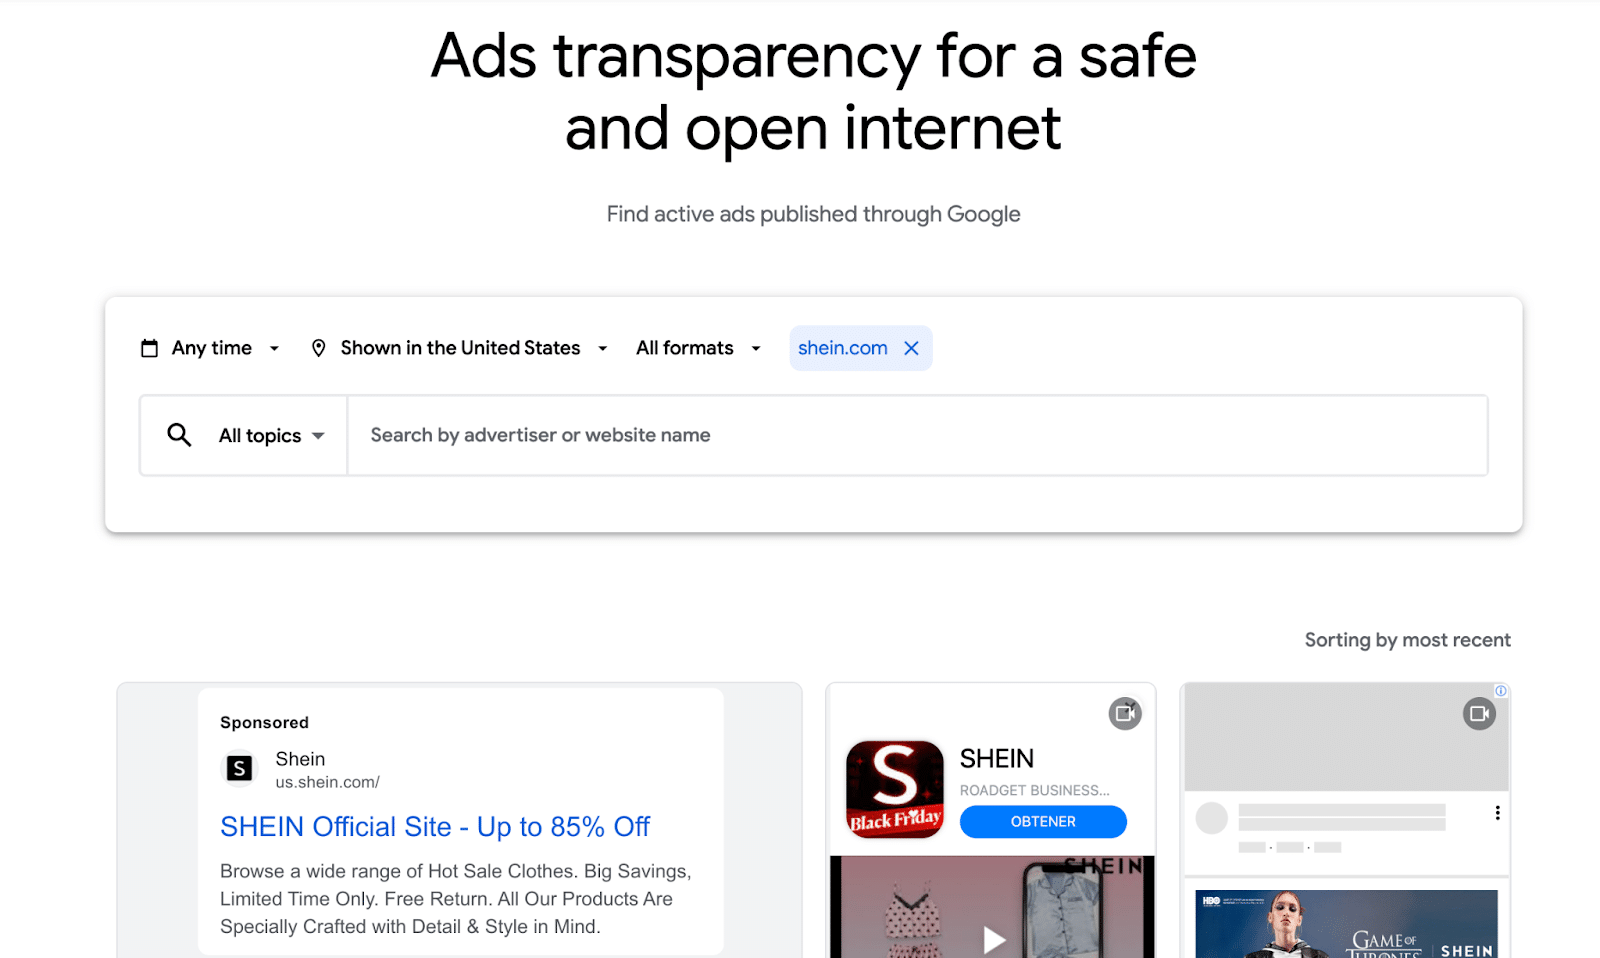 tool-to-spy-on-competition-google-ads-transparency-center